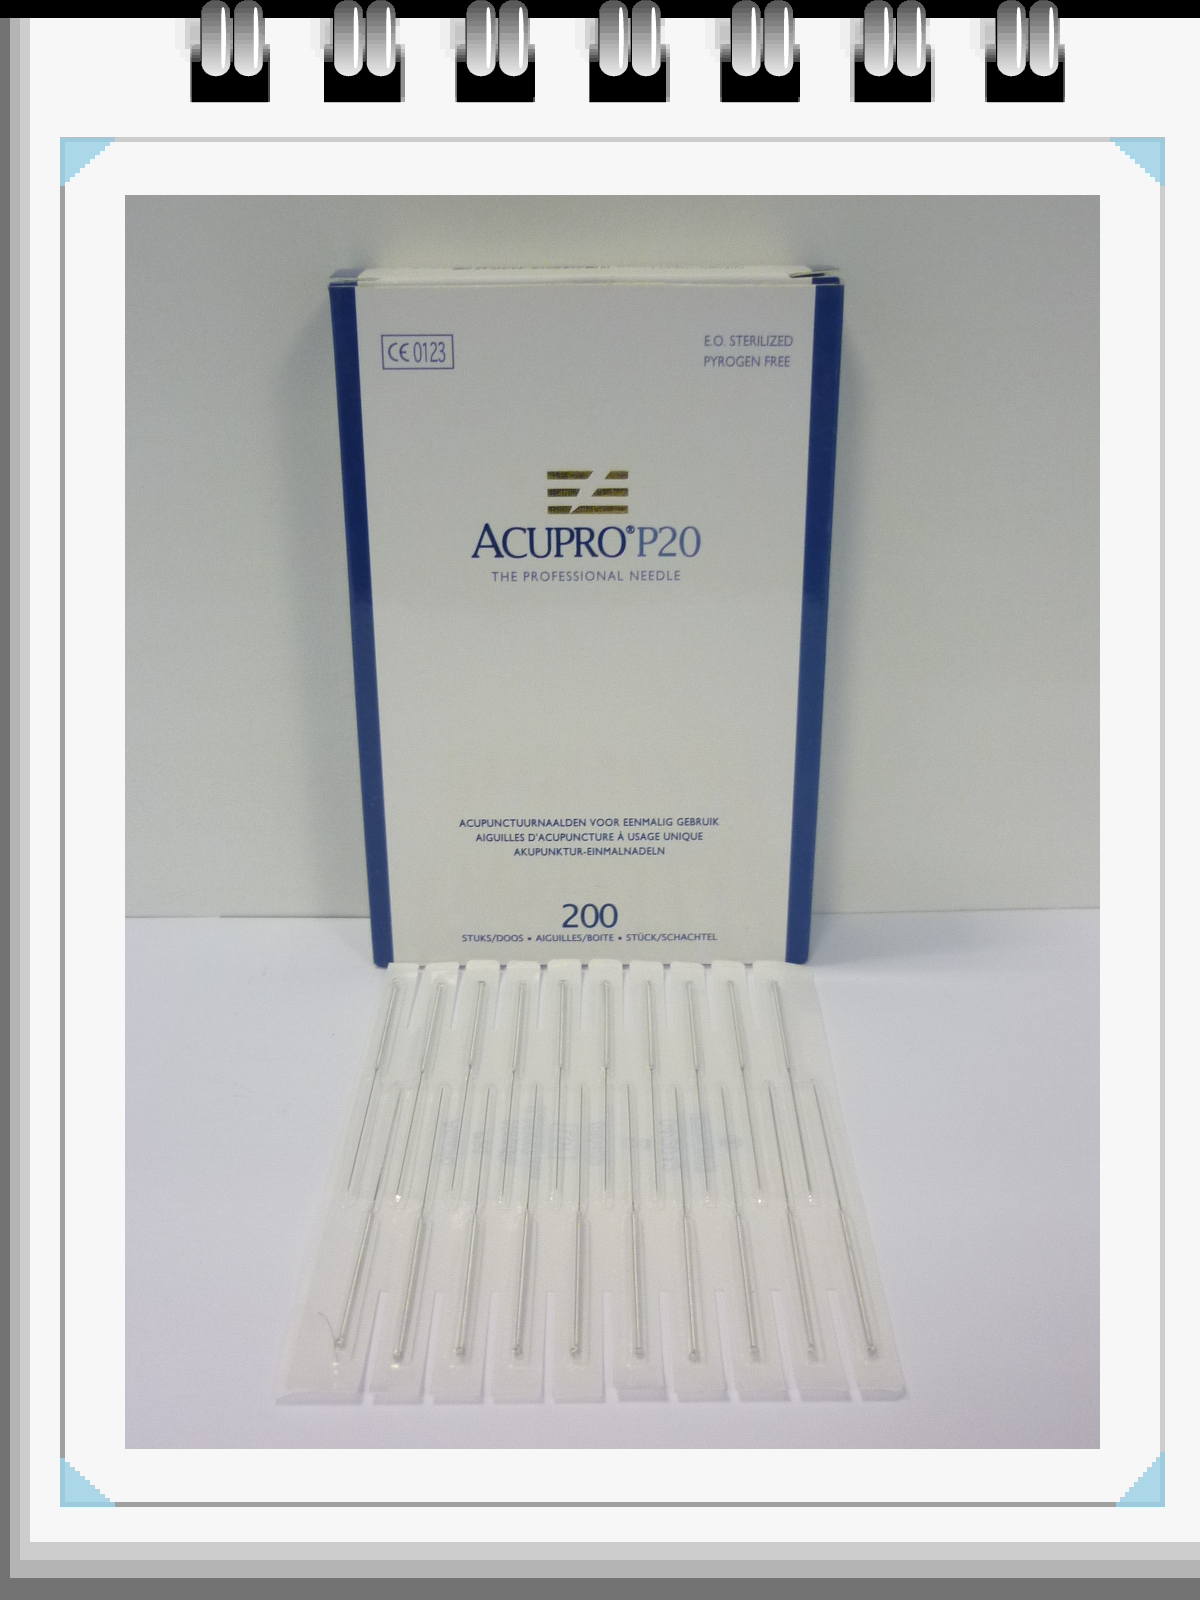 All Products - Acupuncture naalden 0,20 x 13mm - p--200